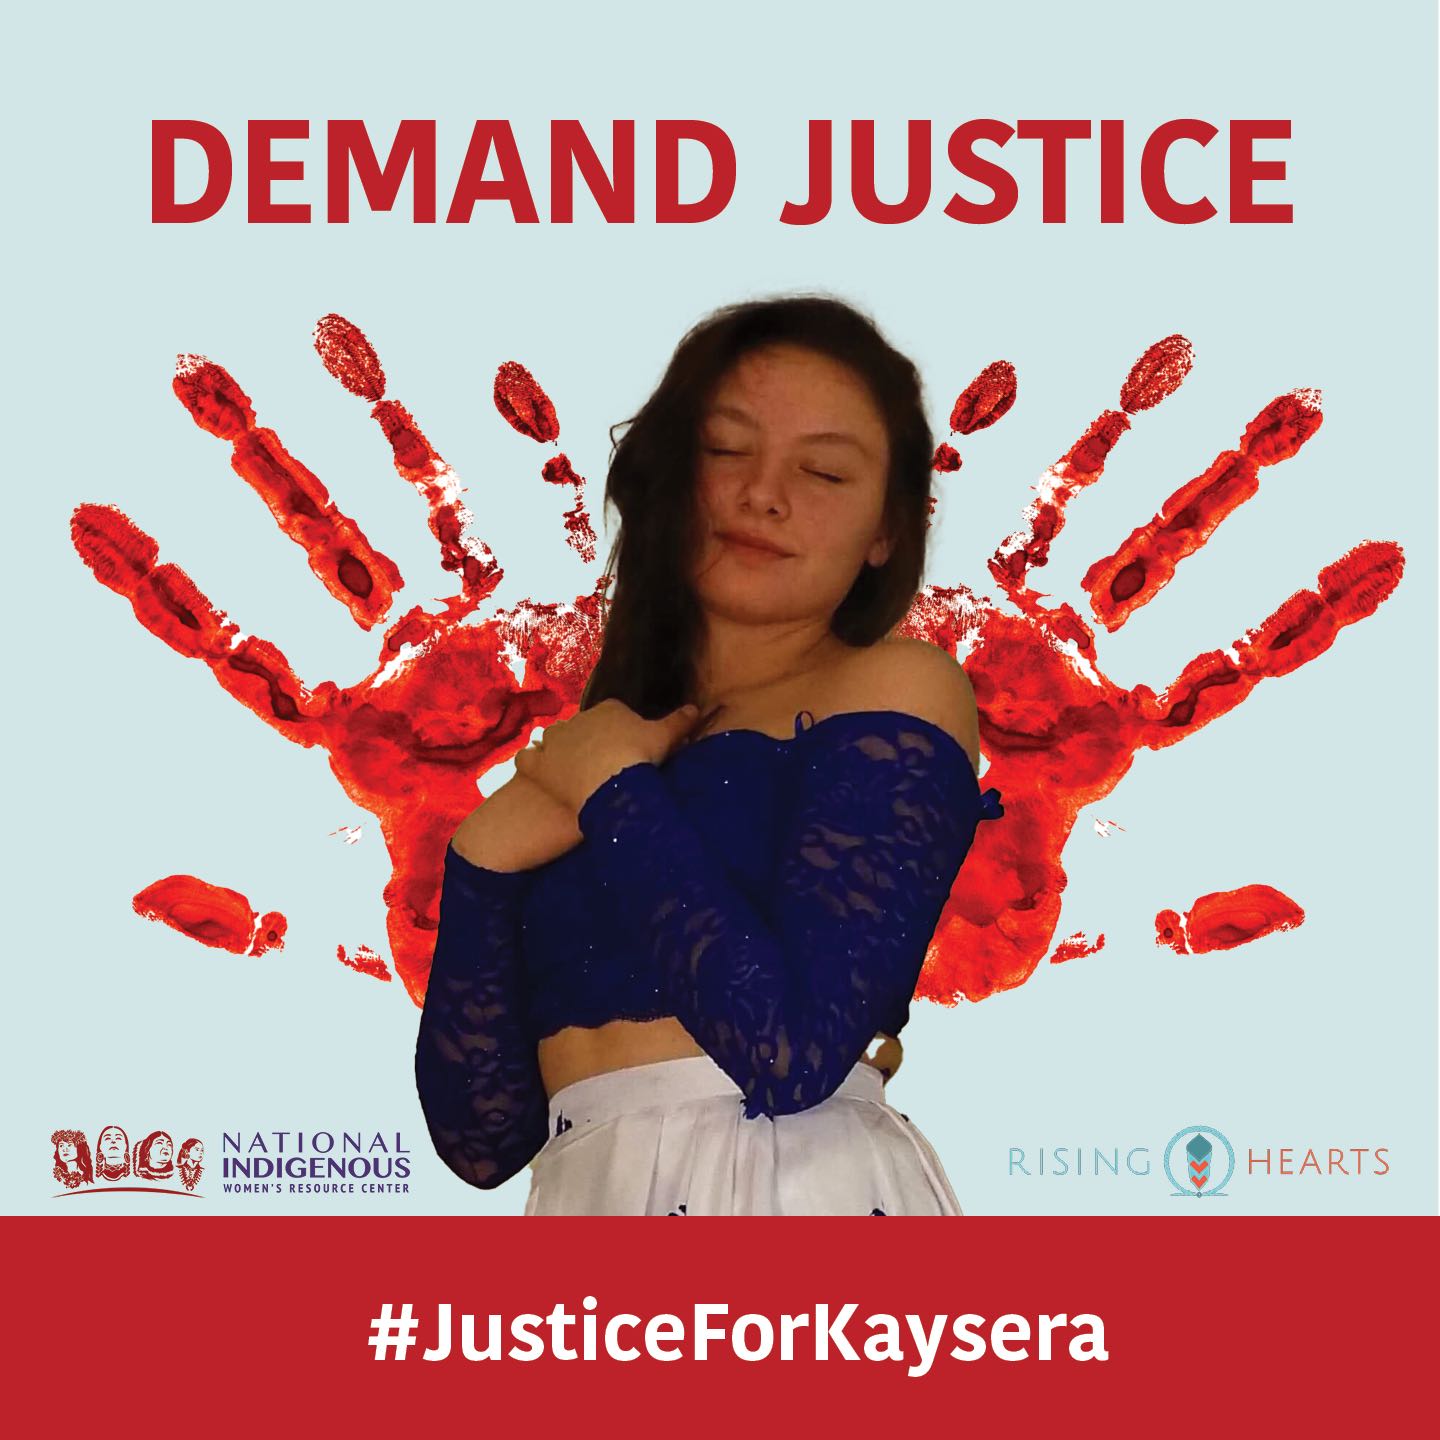 "ID: Light teal blue background with image of Kaysera Stops Pretty Places in center with text ‘Demand Justice’ above and ‘#JusticeforKaysera’ hashtag along bottom red border, with logo of NIWRC and Rising Hearts on left and right side."